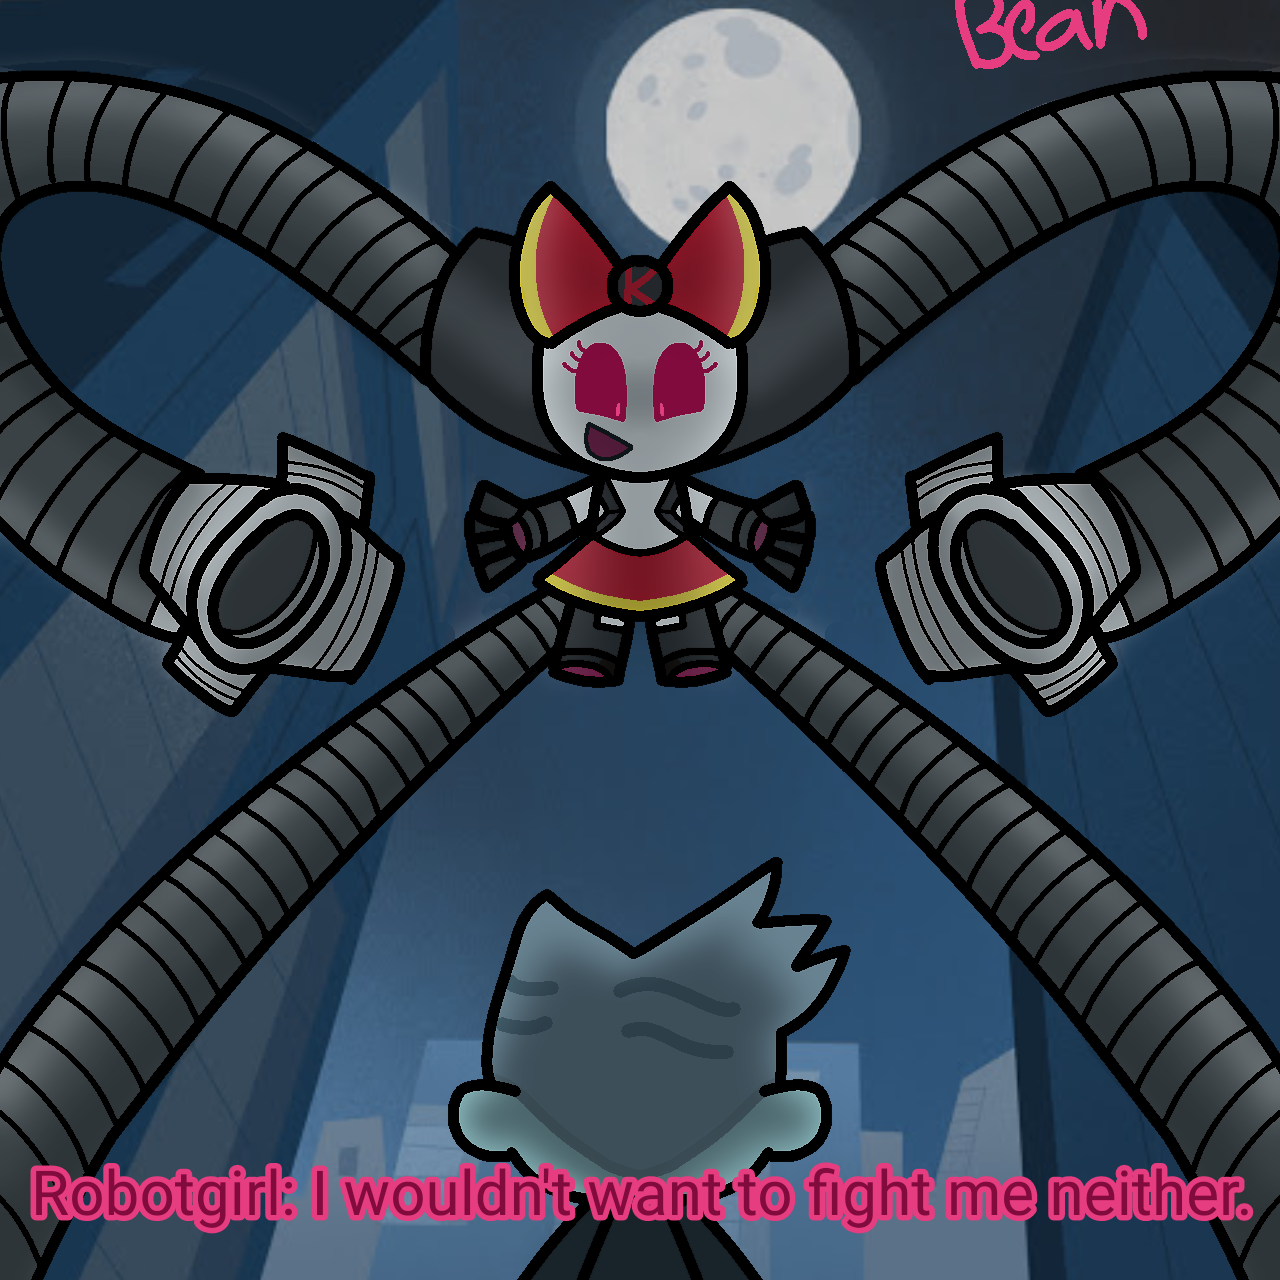 You Are An Idiot (Red Alt) by Robotkirby12 on DeviantArt